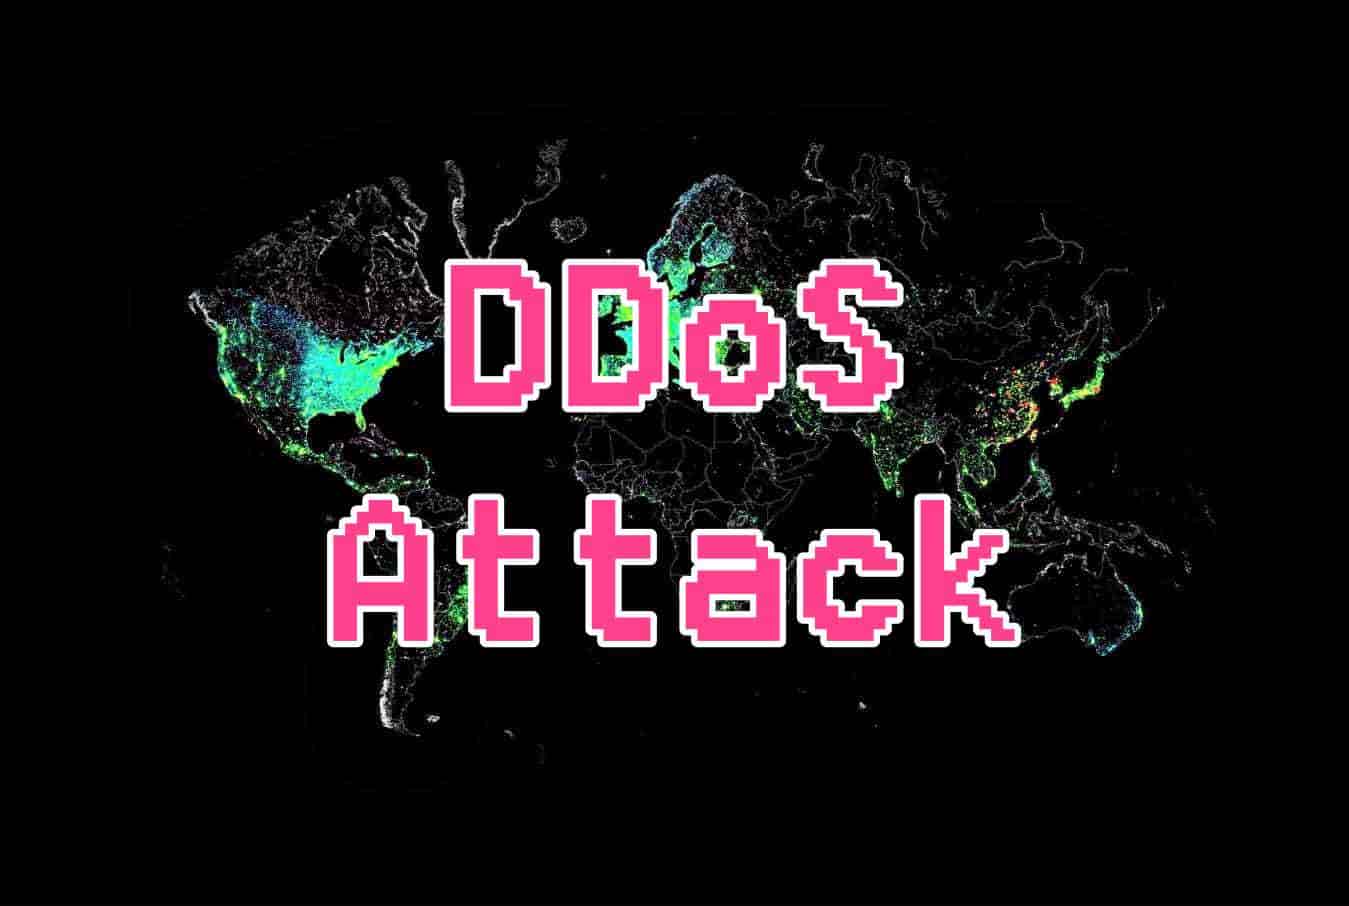 Top institutions at a major EU country hit by cripping DDoS attacks